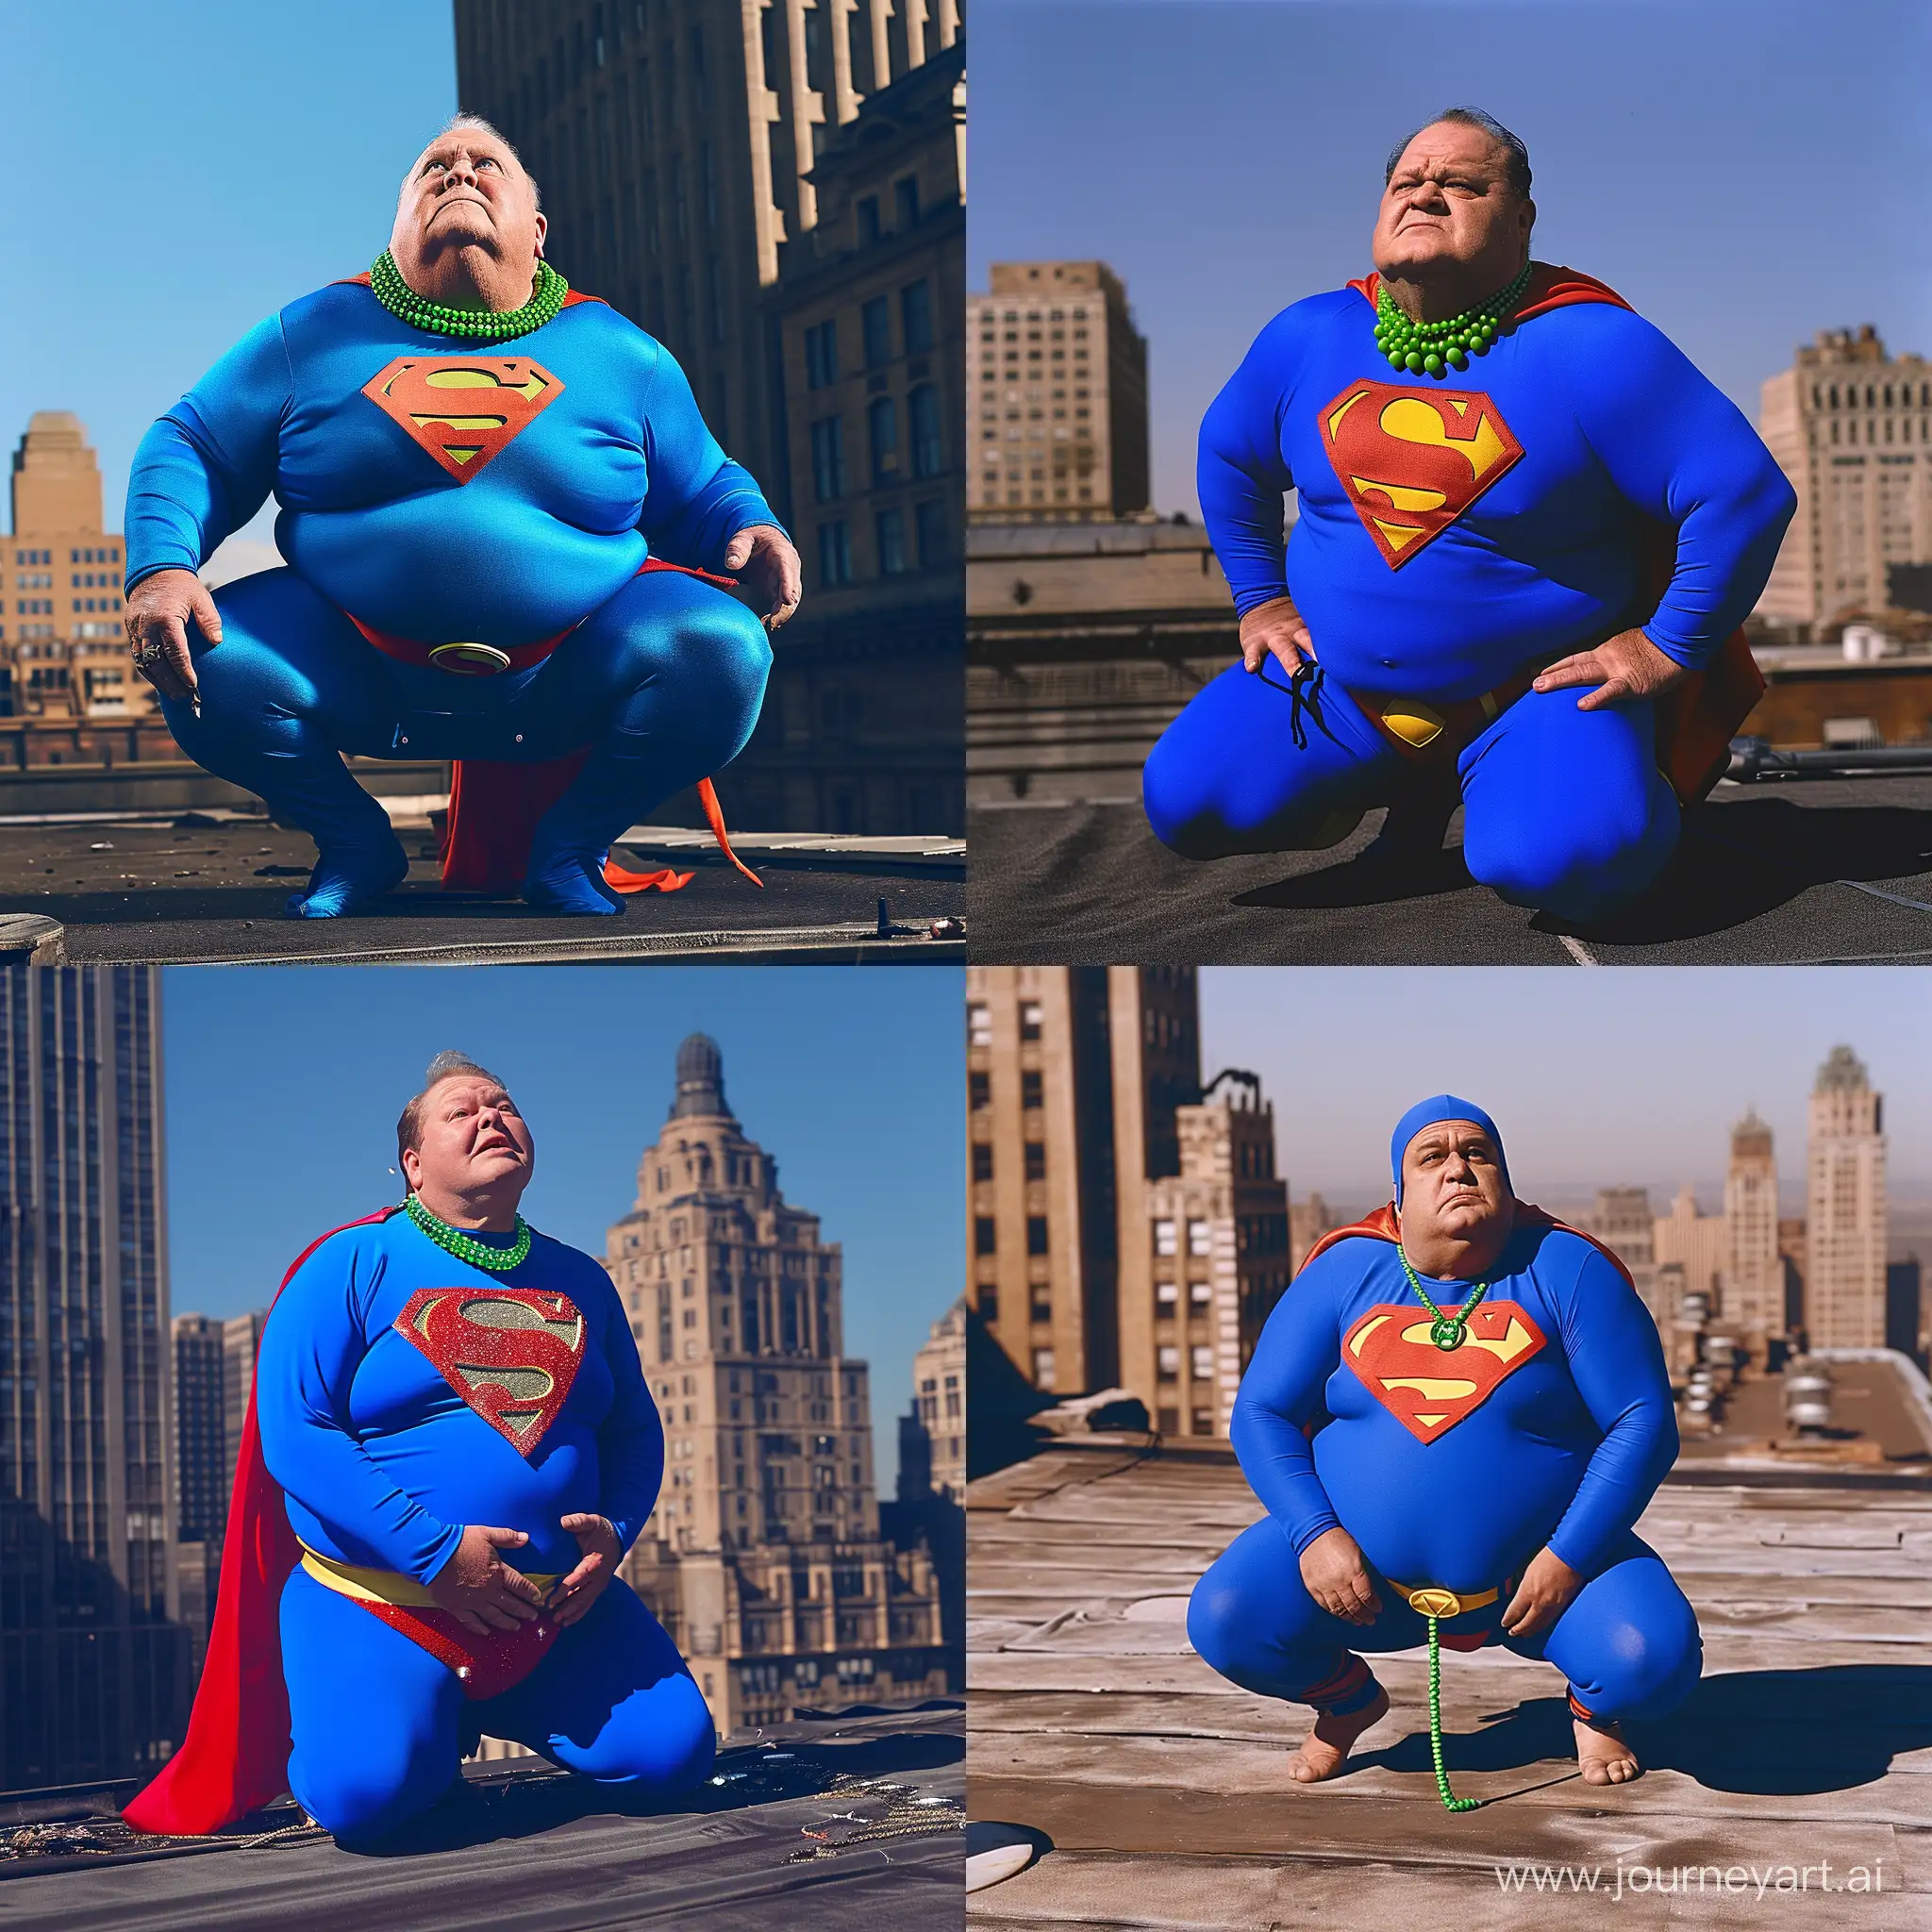 chubby man aged 70 wearing a tight bright blue superman costume, kneeling on a rooftop, bright green necklace --v 6